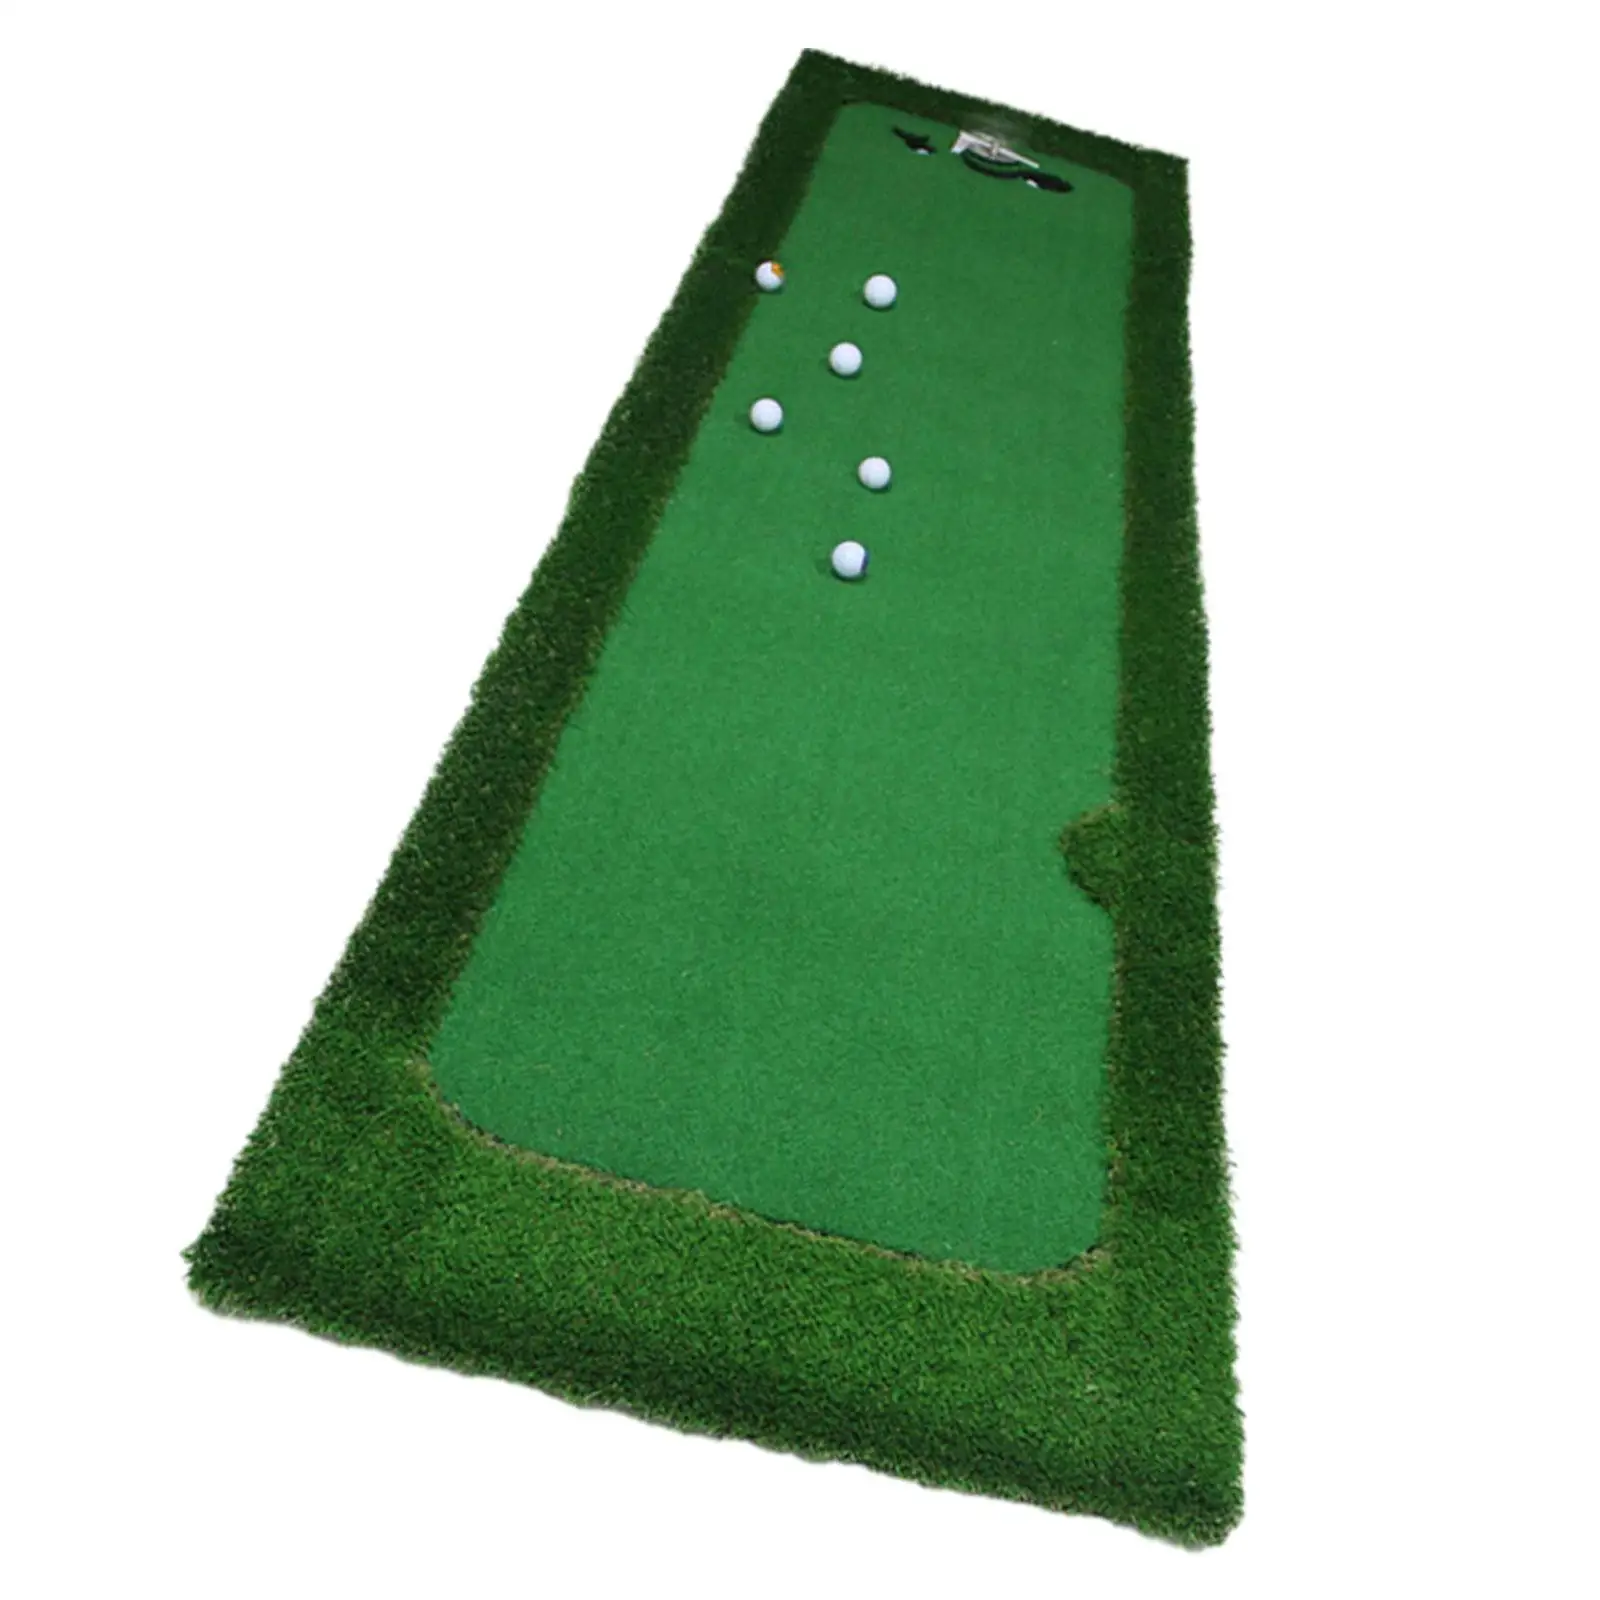 Golf Putting Mat Portable Nonslip Green with 6Pcs Balls for Games Party Home